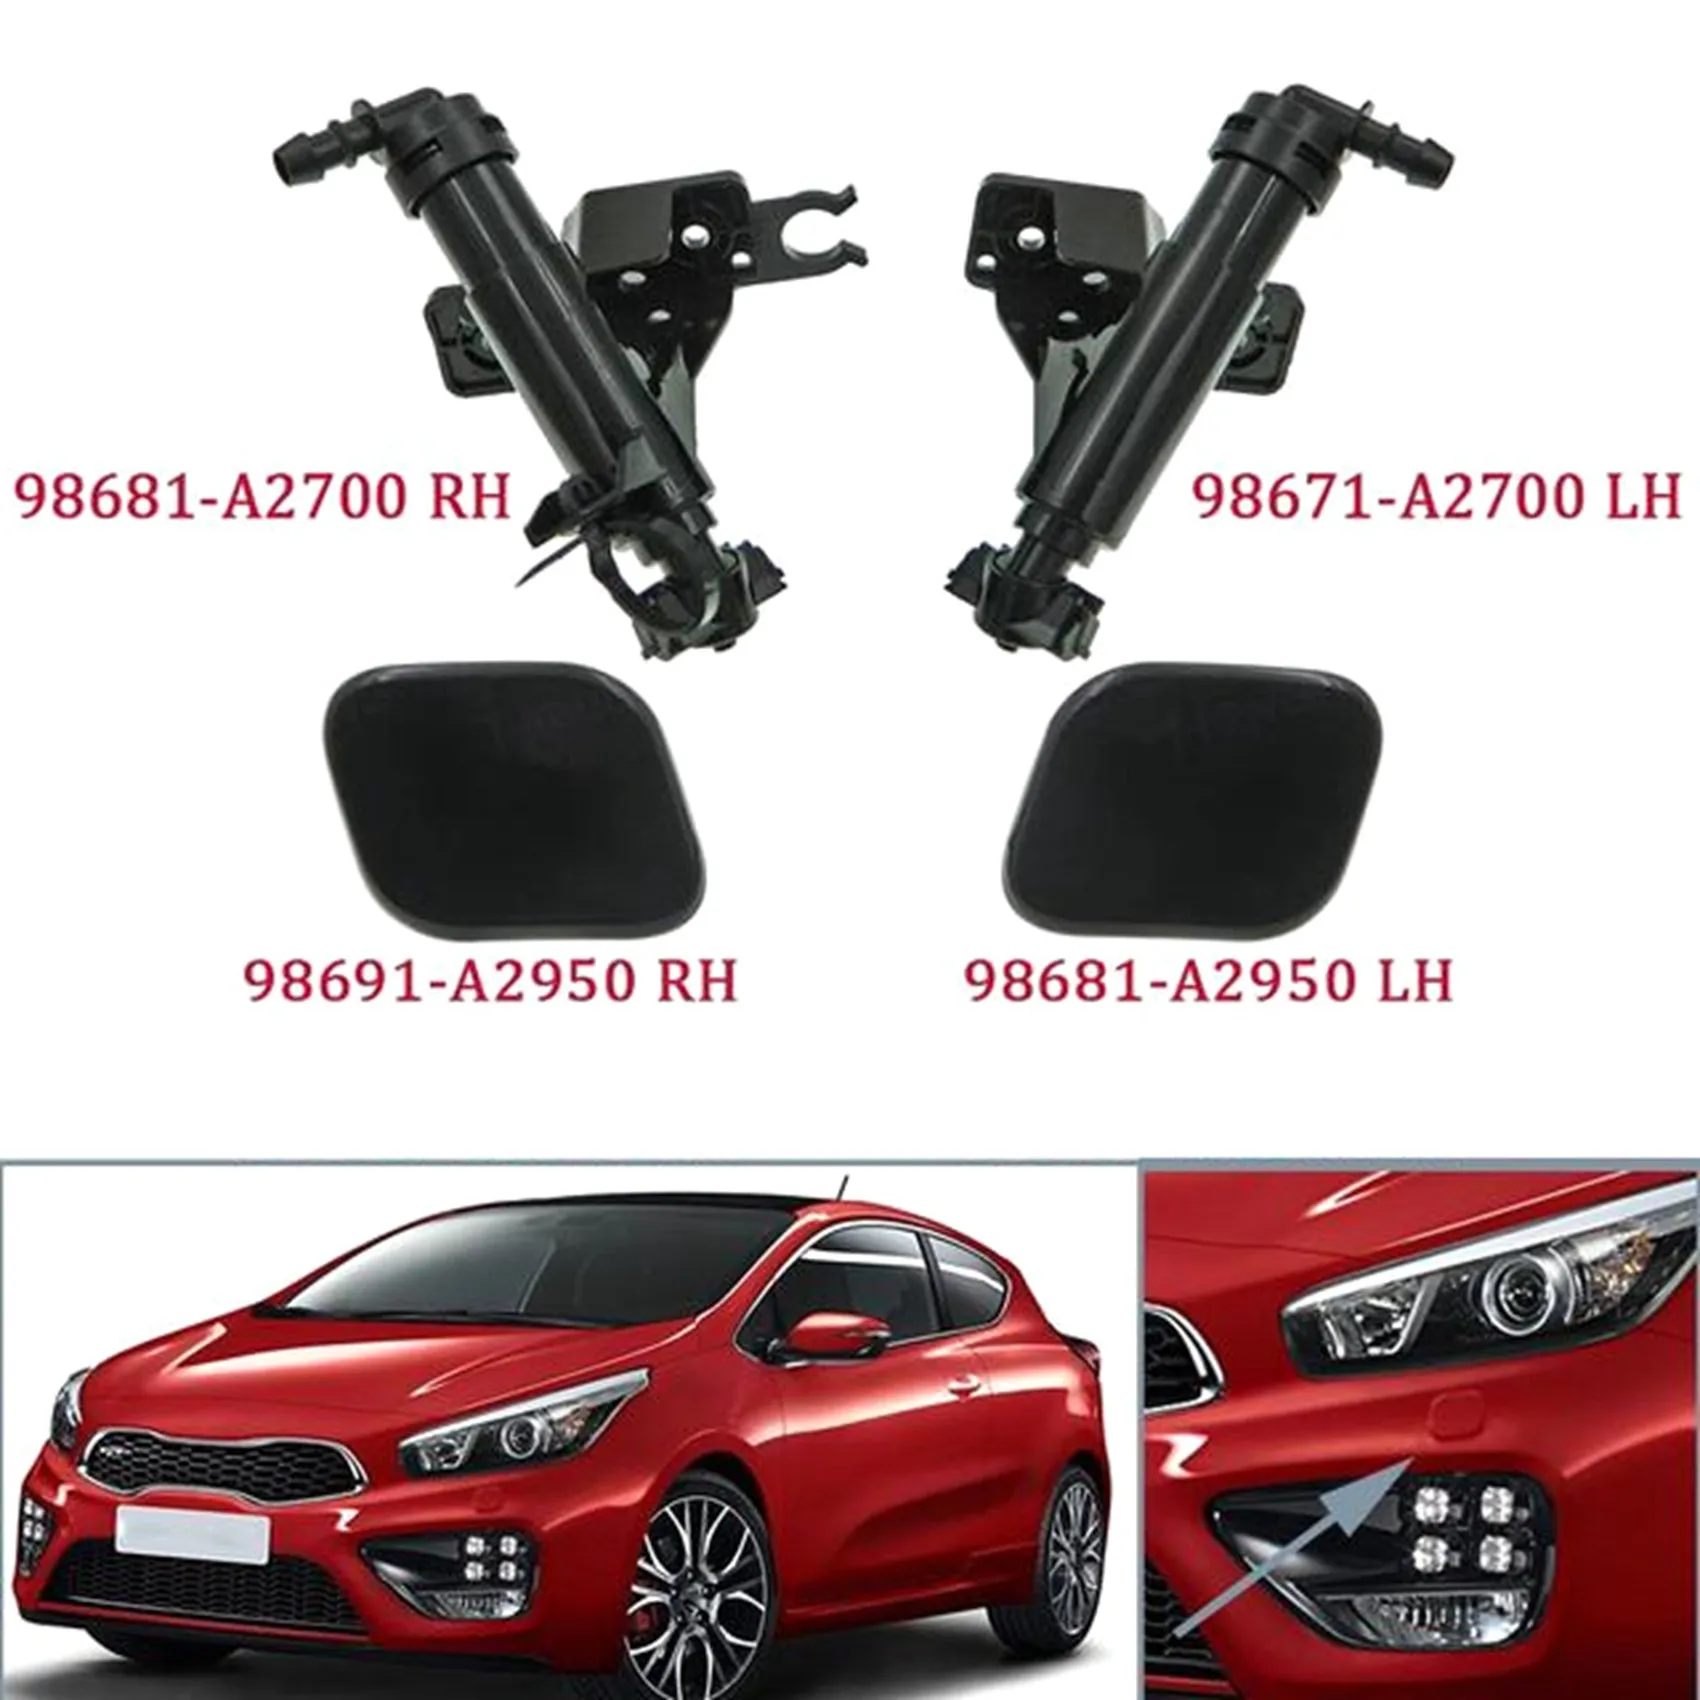 

Car Headlight Headlamp Washer Nozzle Jet Cap Cover R&L for KIA CEED 2012-2016 98671-A2700 98681-A2700 98691-A2950